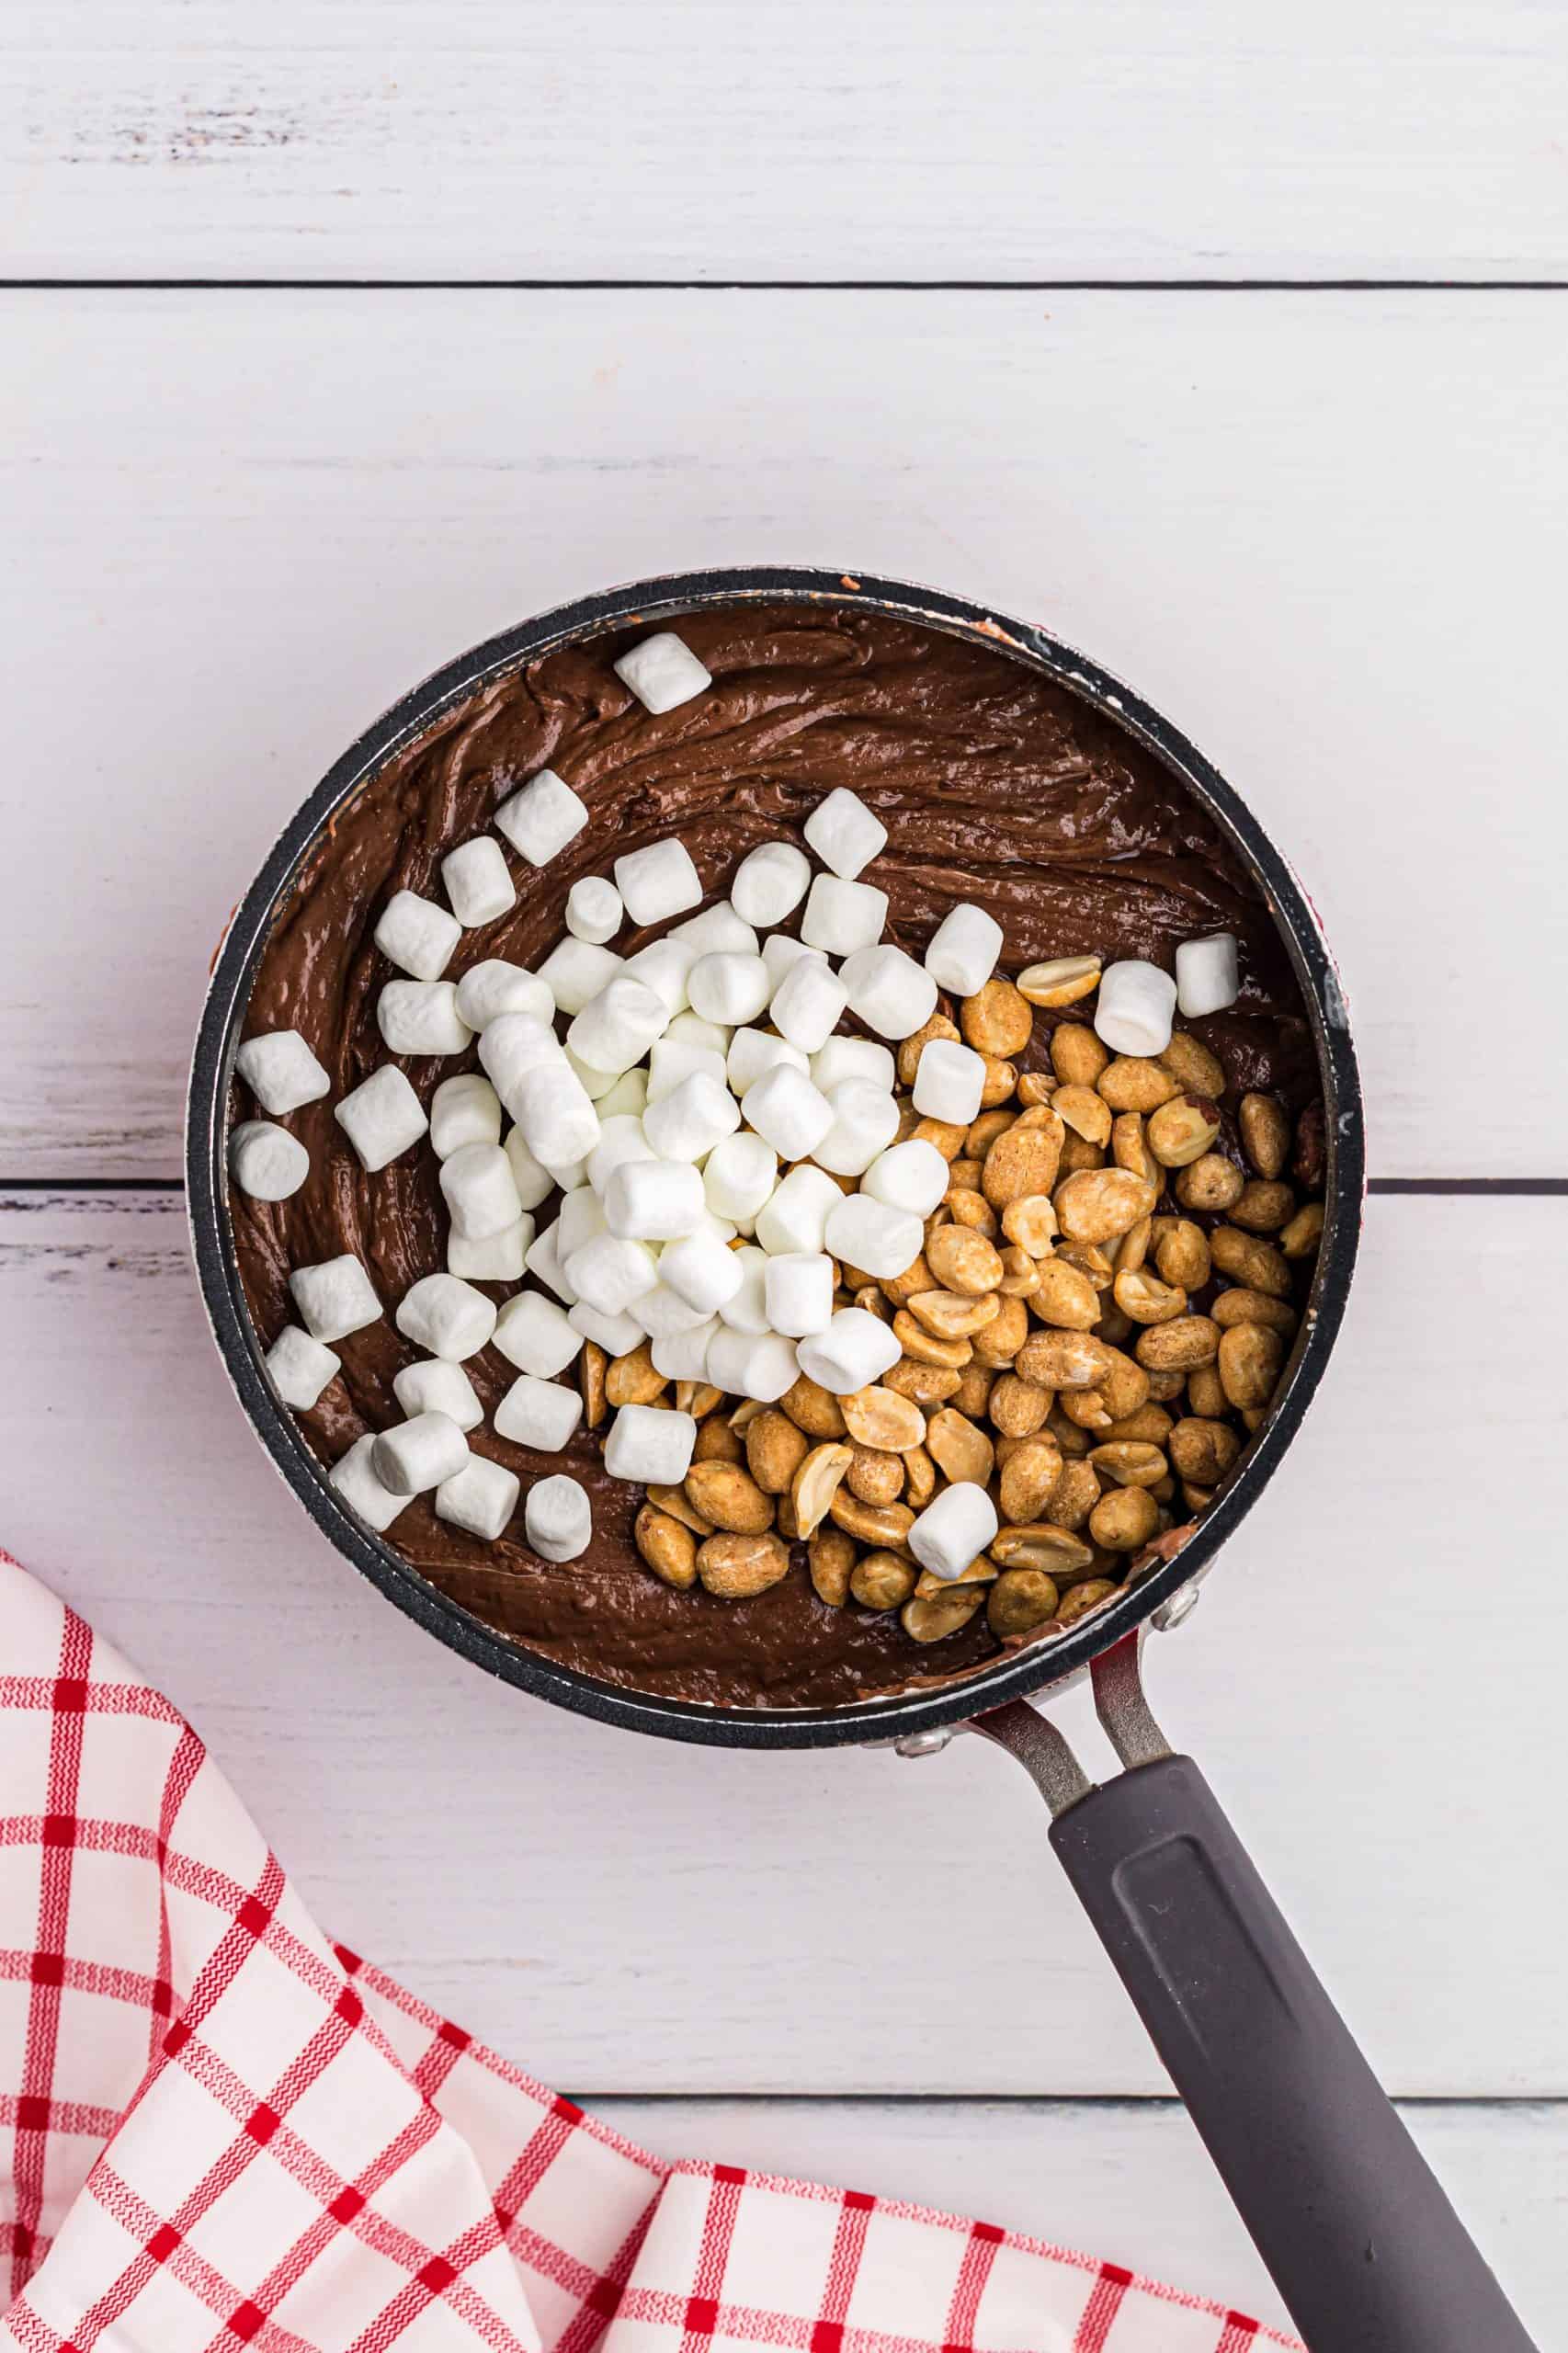 mini marshmallows and peanuts added to melted chocolate mixture in a sauce pan.